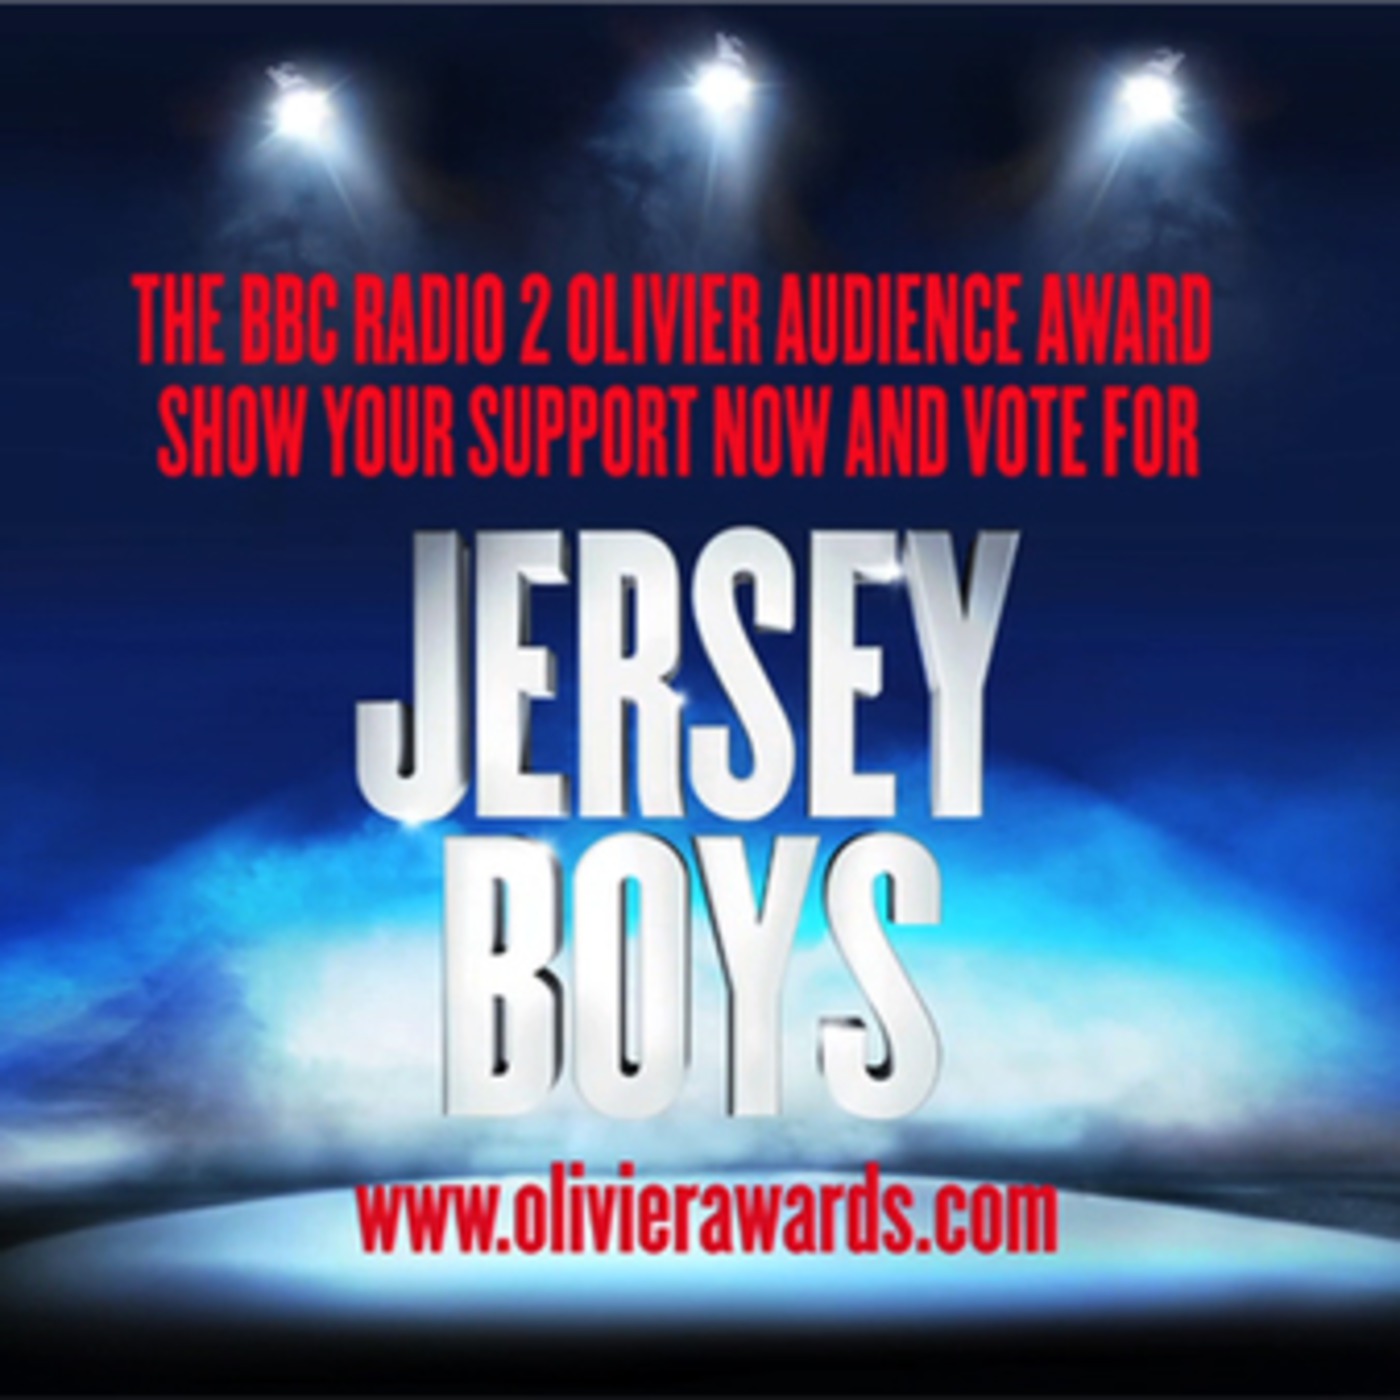 Vote for Jersey Boys